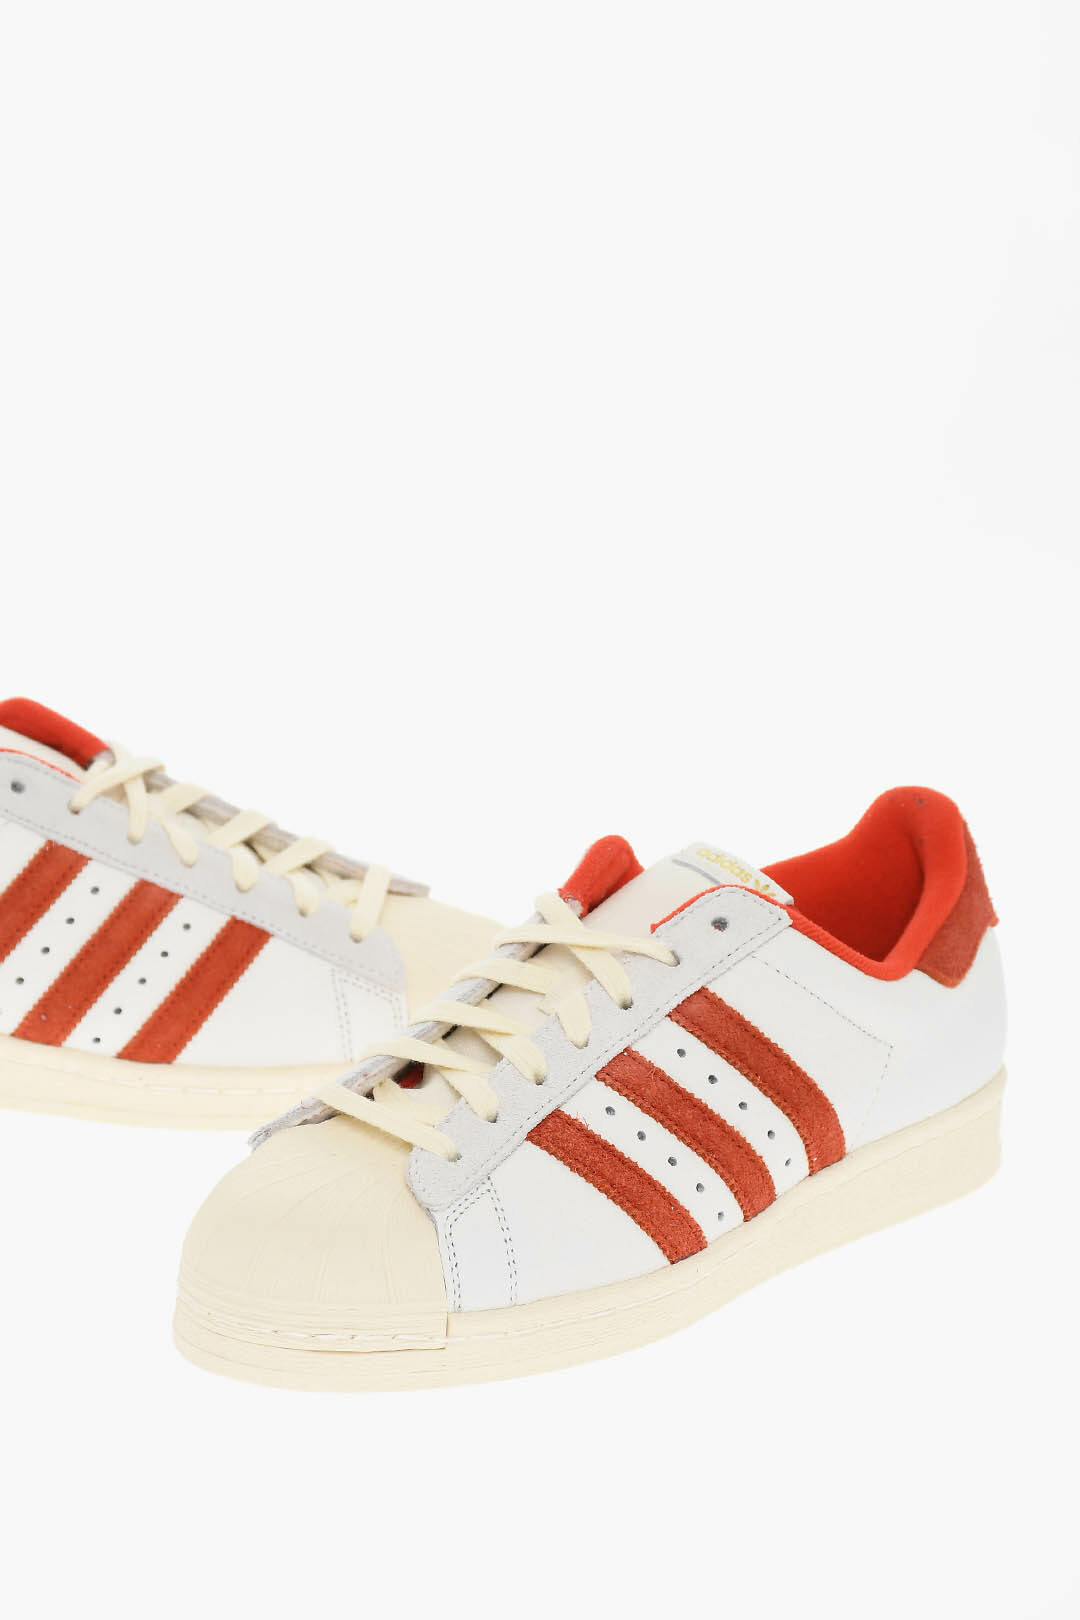 Molester Op risico angst Adidas Leather SUPERSTAR 82 Sneakers with Contrasting Details men - Glamood  Outlet